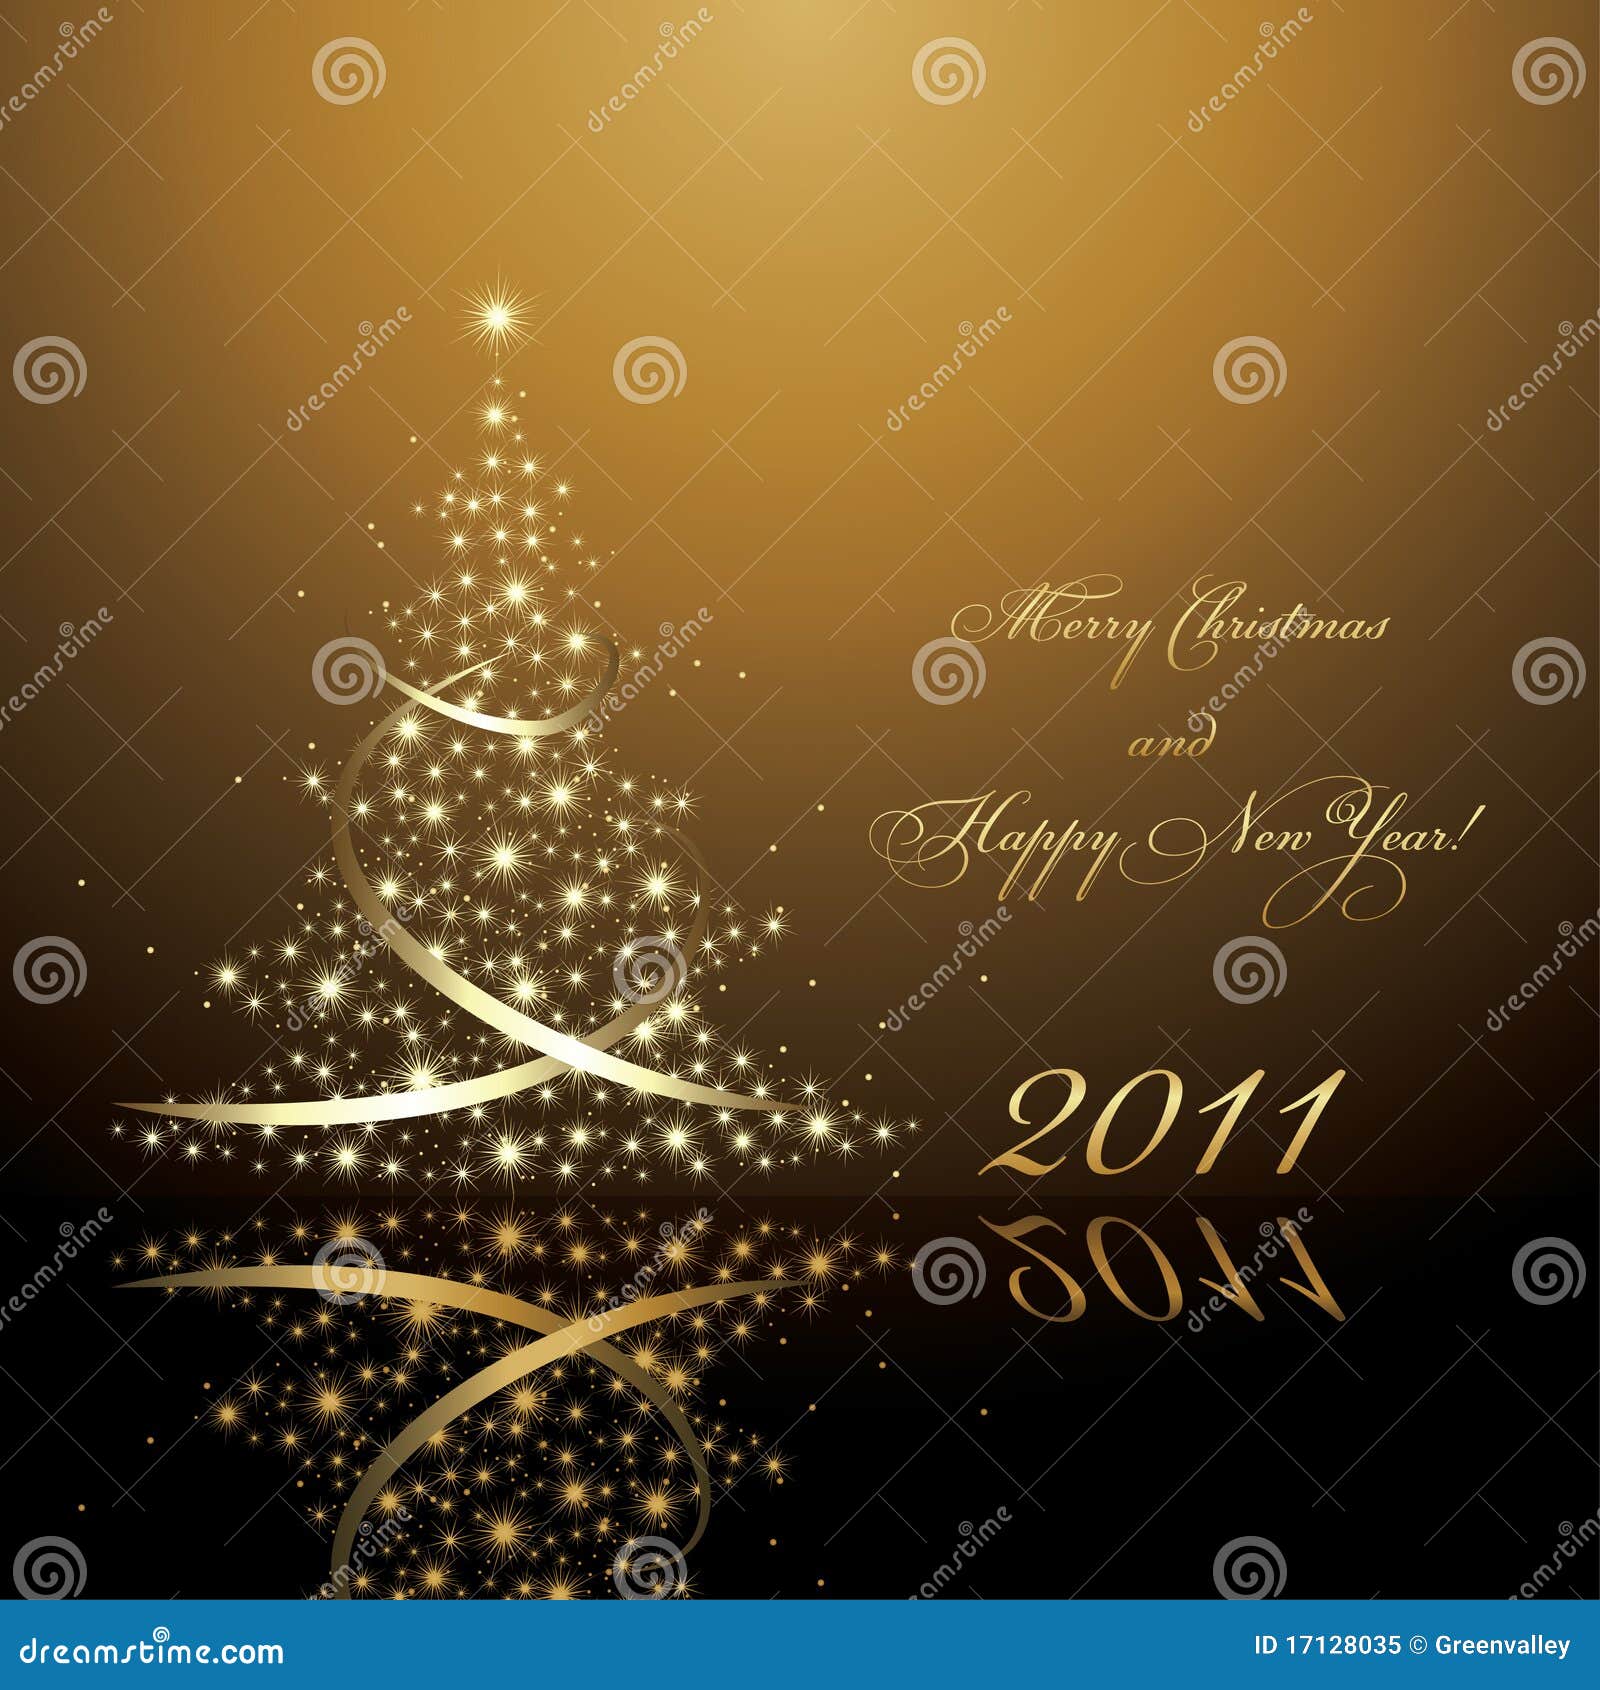 download 2011 new year card